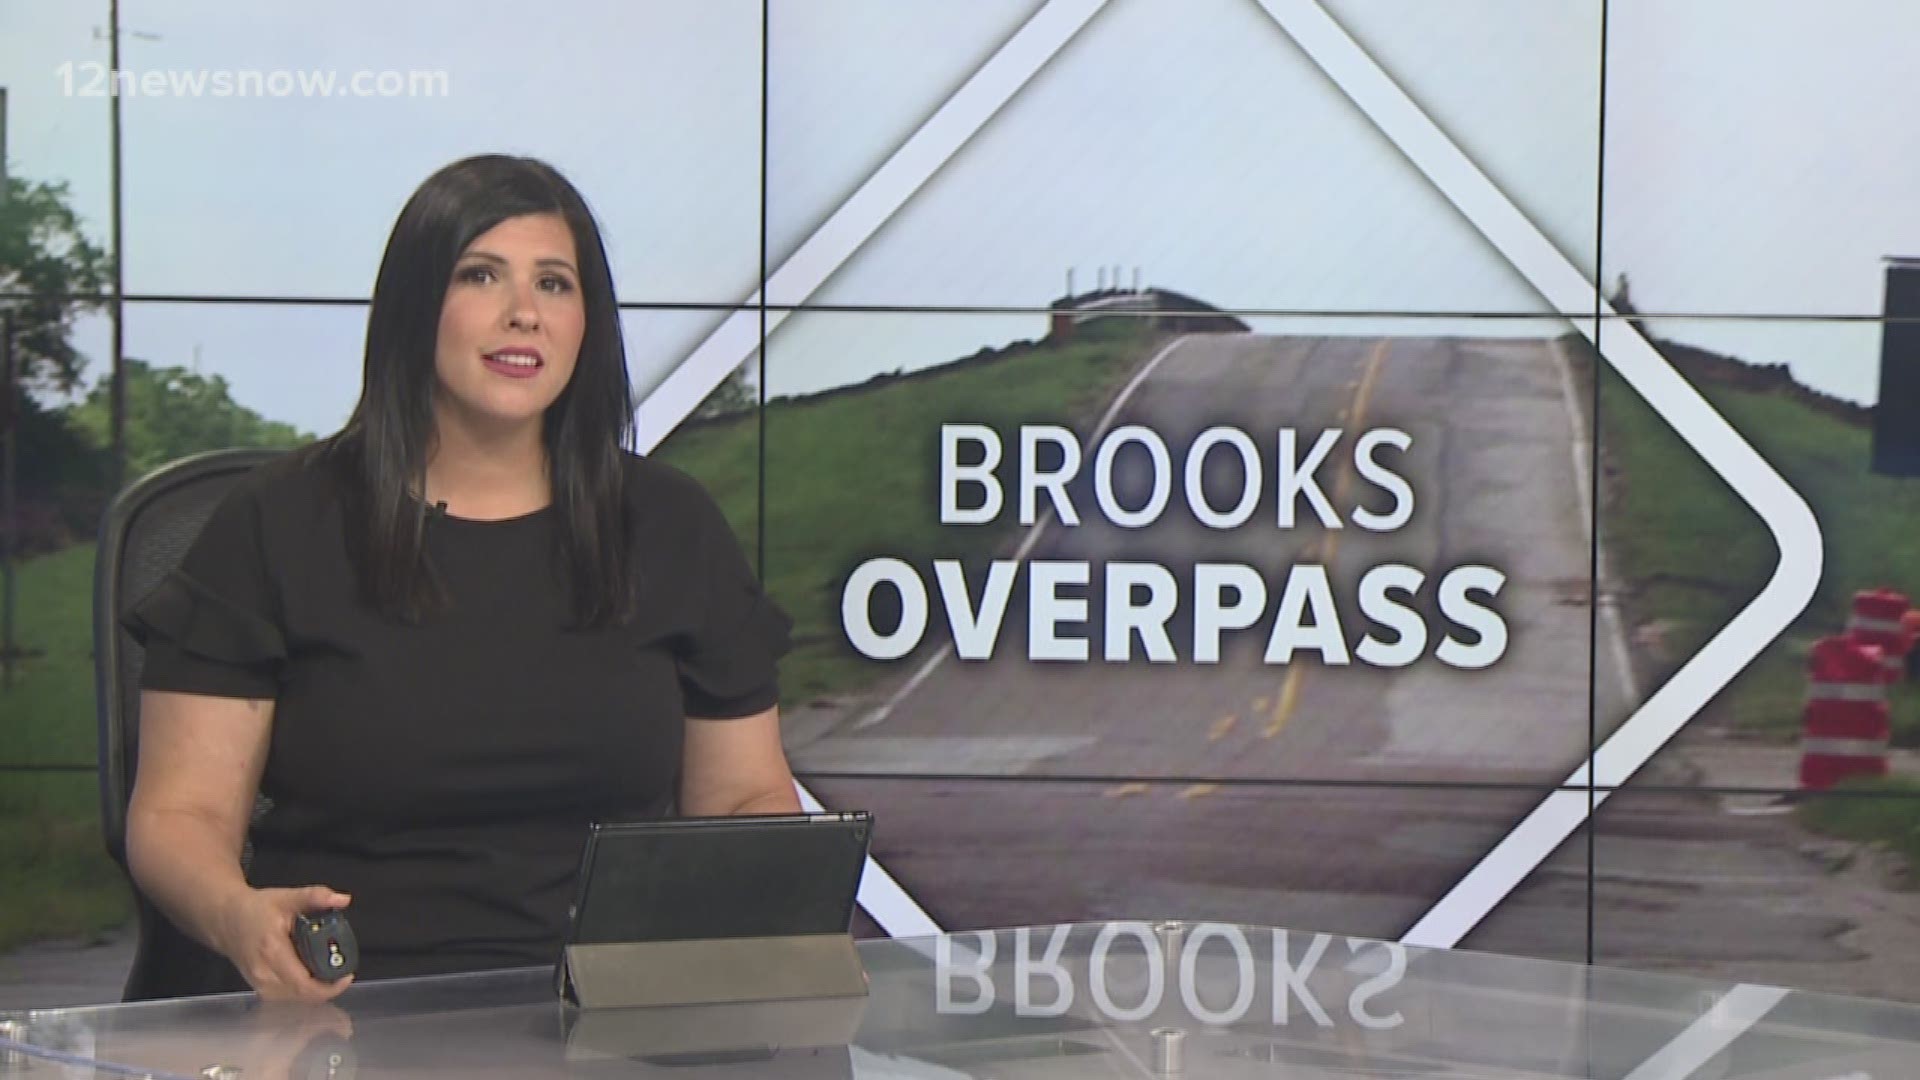 If you plan on taking a trip this weekend that takes you on I-10 near Brooks Road, listen up! Workers have started demolishing the overpass.